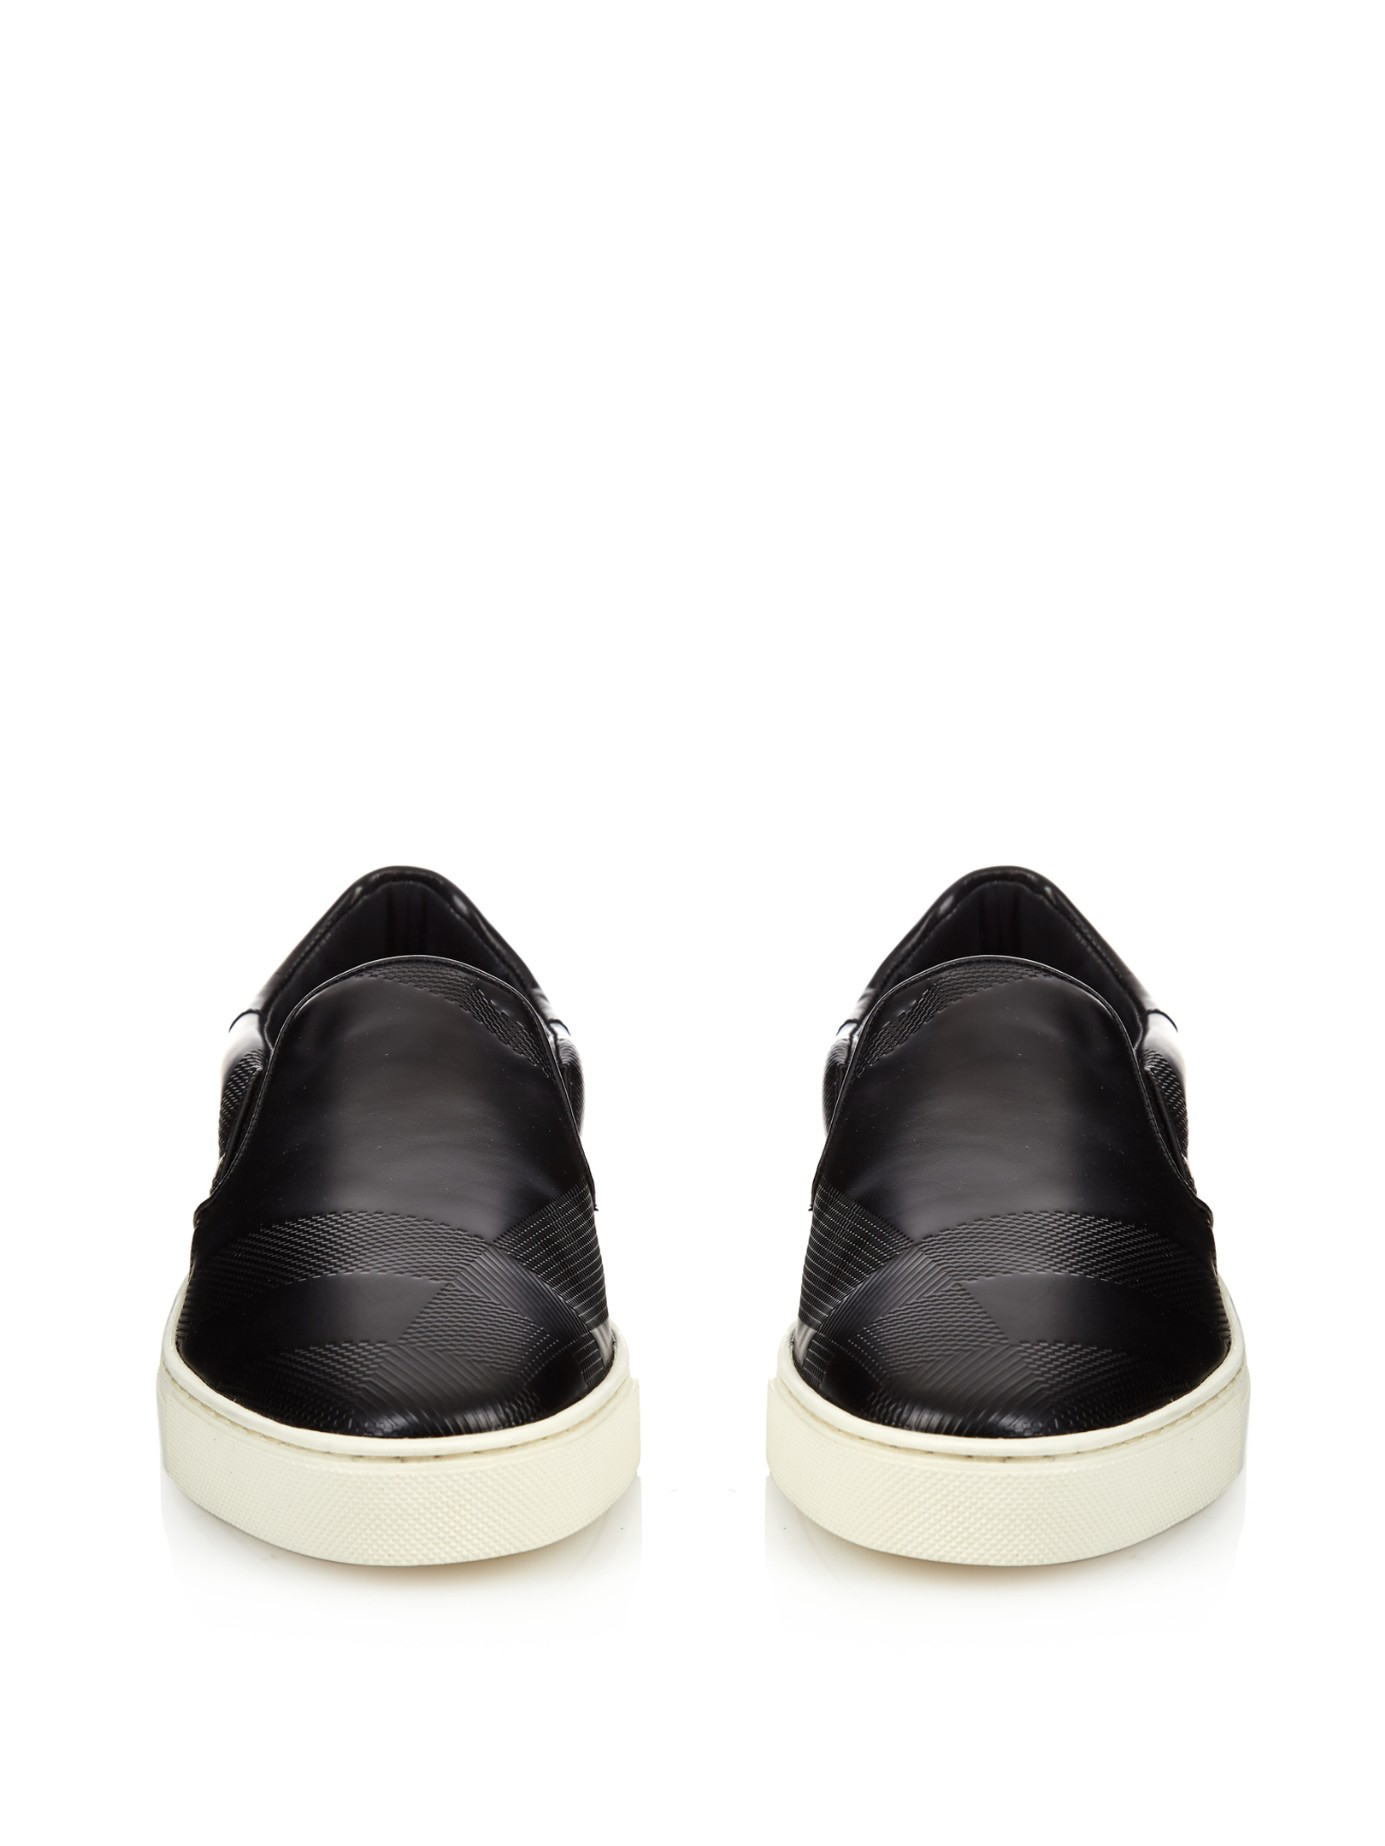 Burberry Check-embossed Leather Trainers in Black for Men -